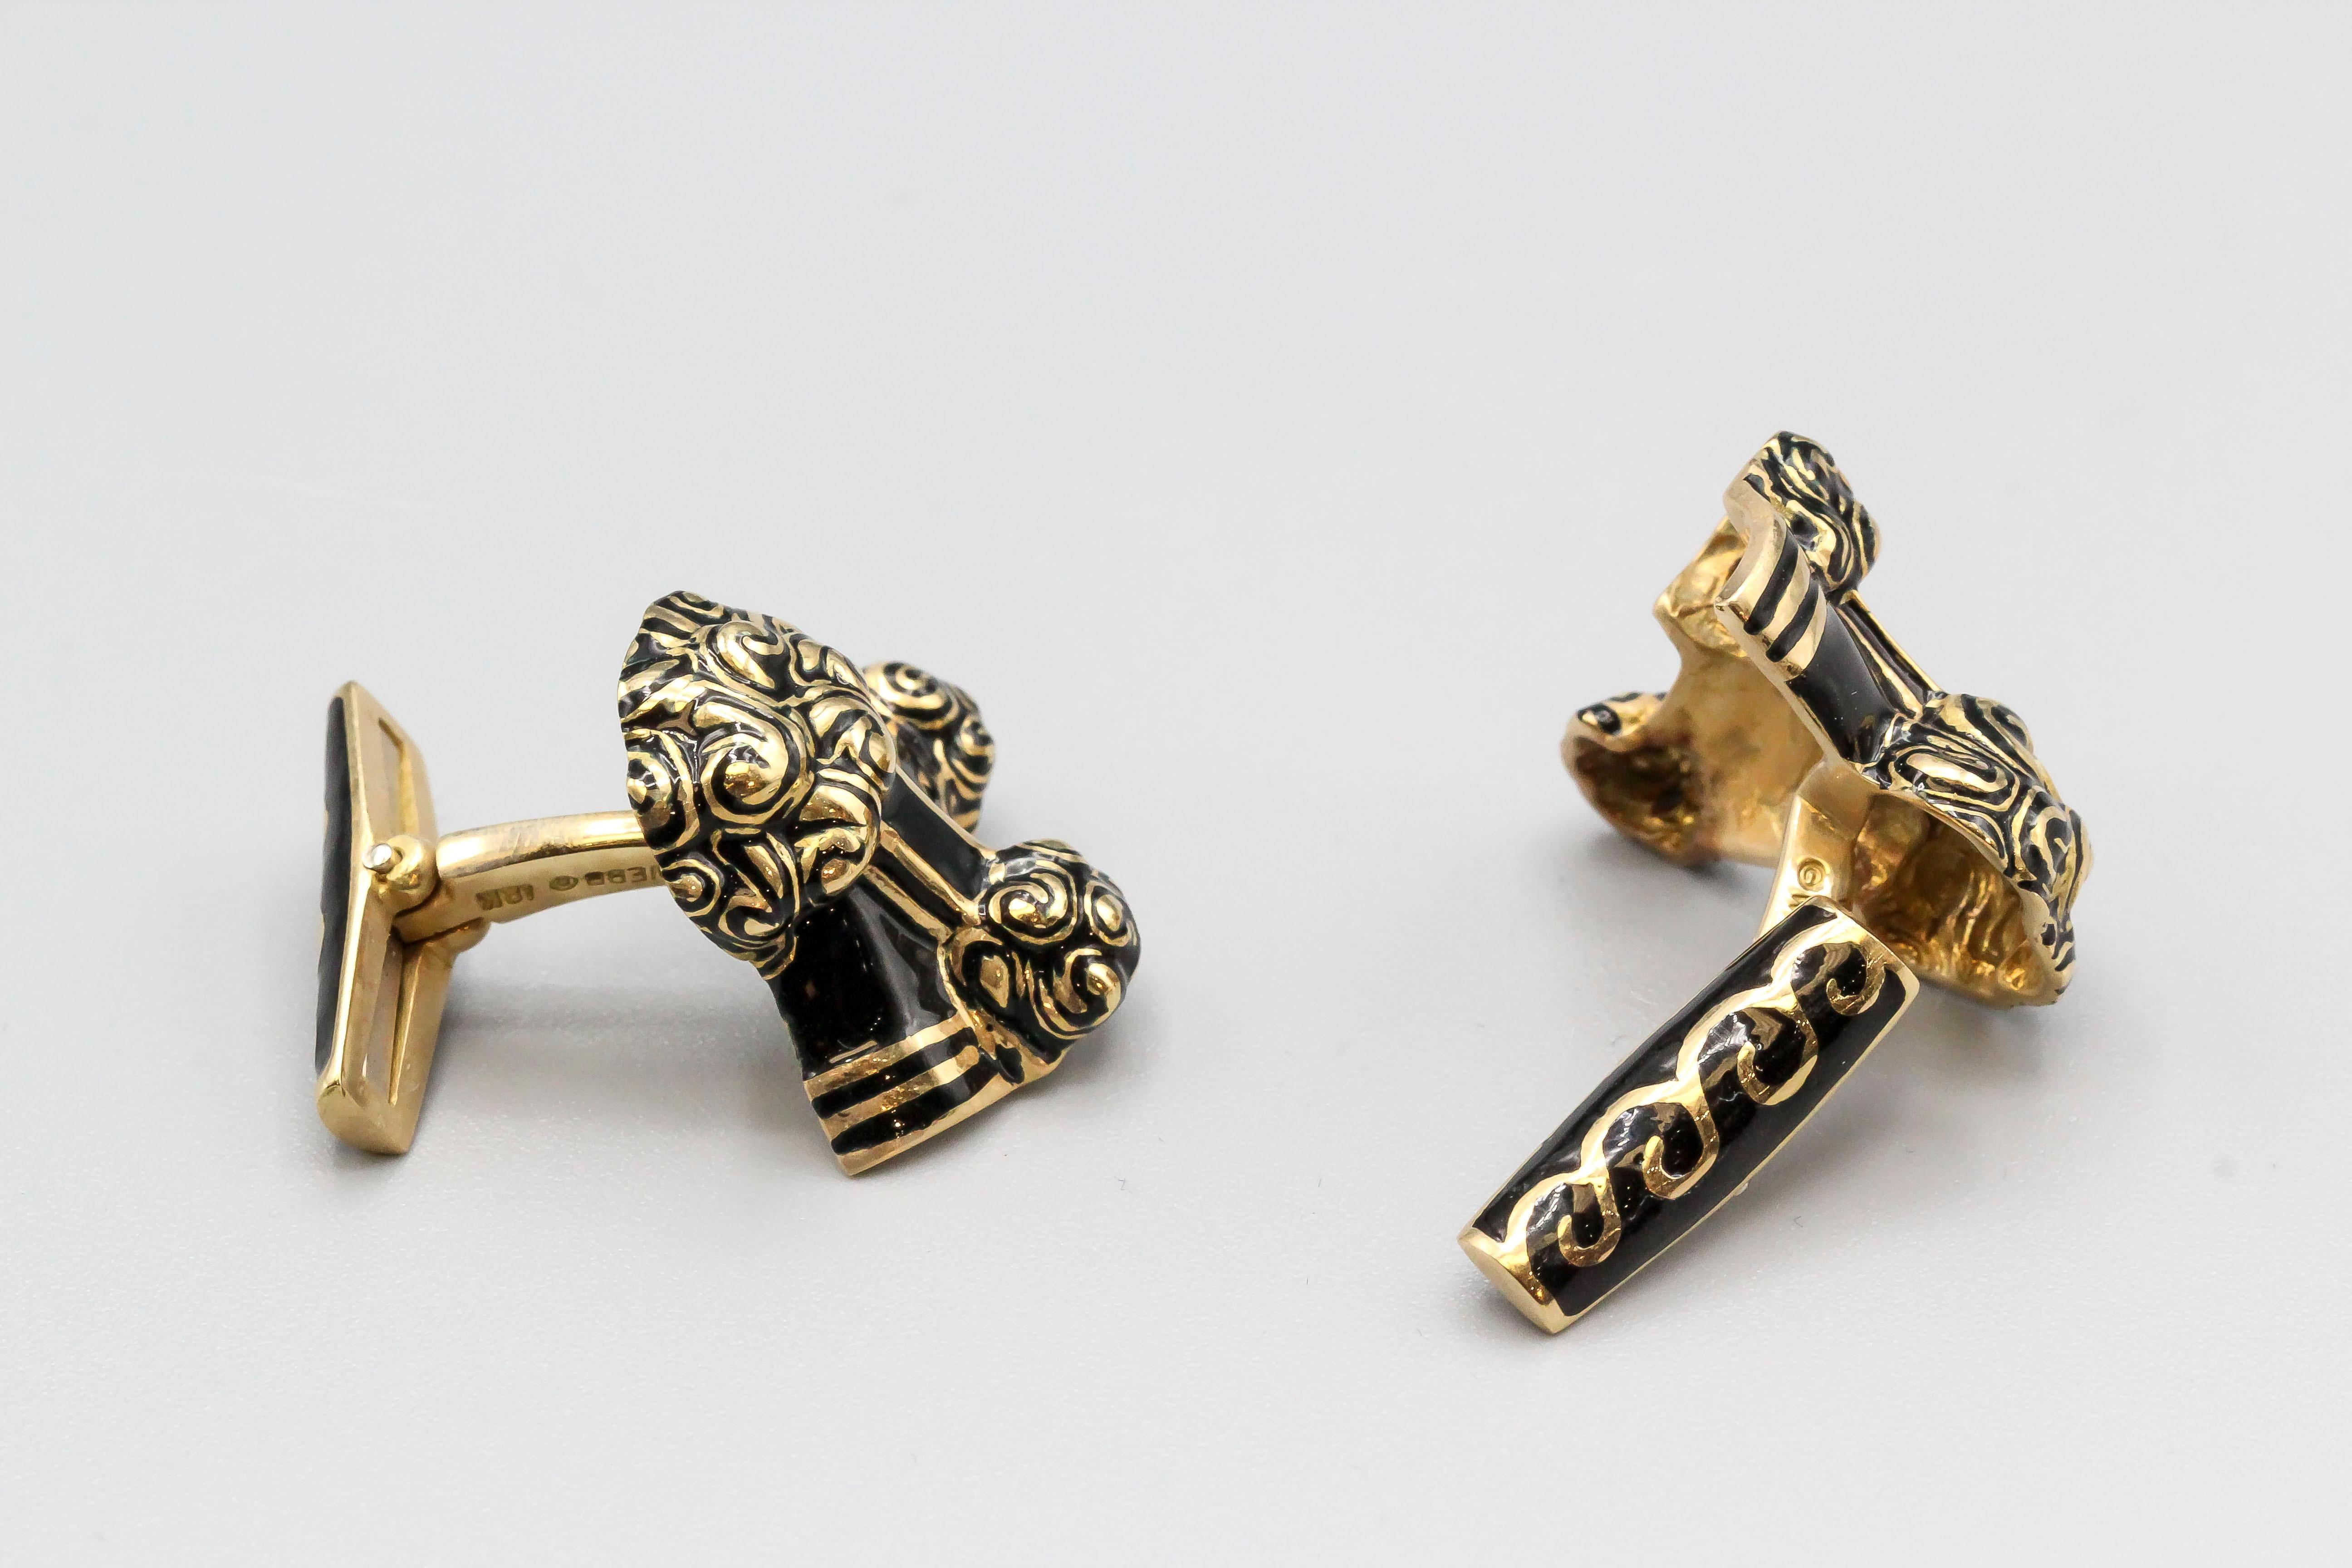 Handsome 18K yellow gold and enamel (black on head and red for the eyes) cufflinks by David Webb. Made in the likeness of French Poodles. 

Hallmarks: Webb, 18K.